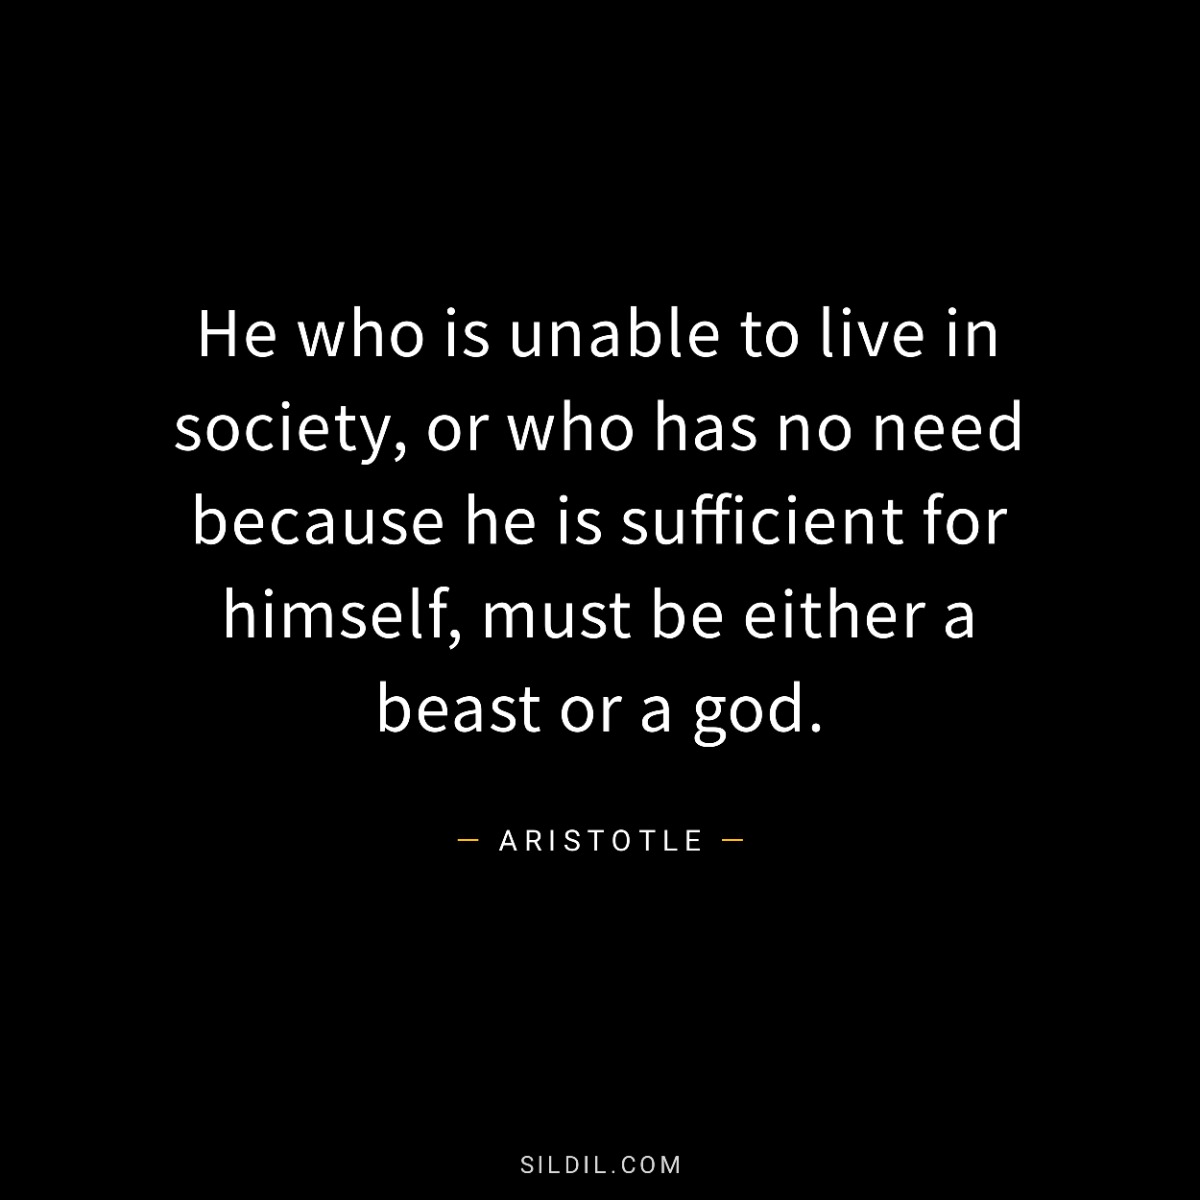 He who is unable to live in society, or who has no need because he is sufficient for himself, must be either a beast or a god.